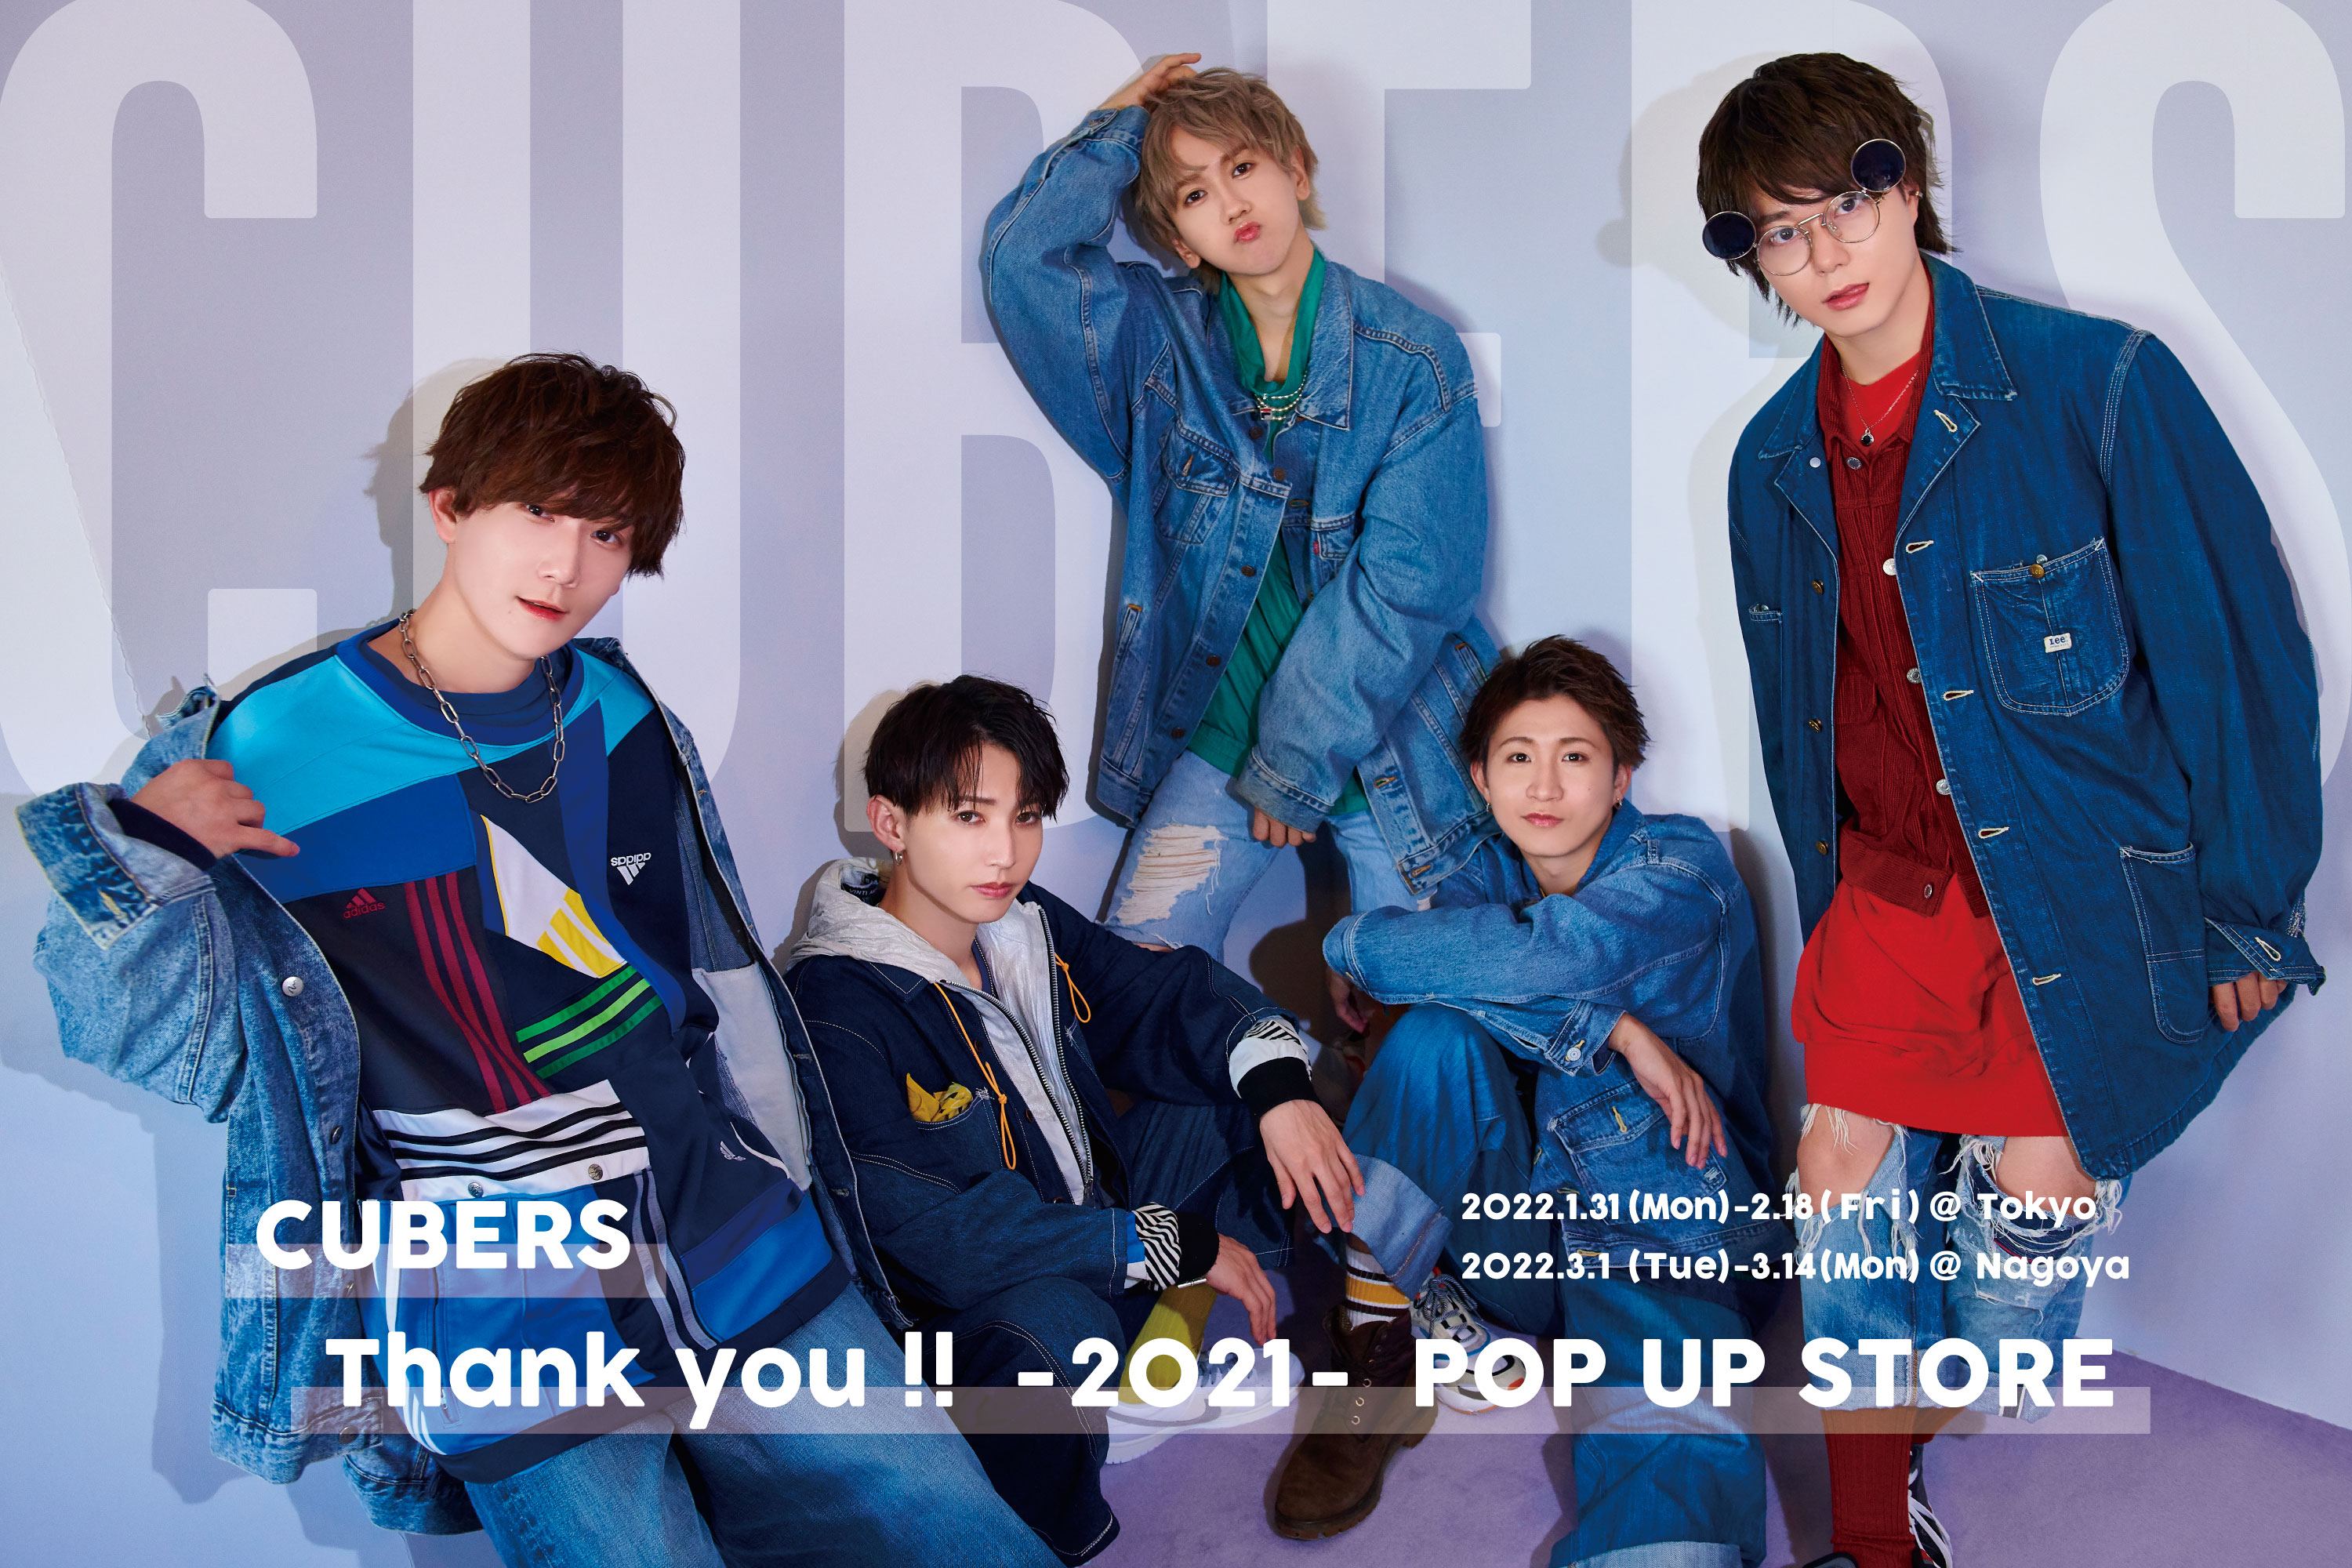 【NEWS】CUBERS「Thank you!!-2021-POP UP STORE」詳細決定！